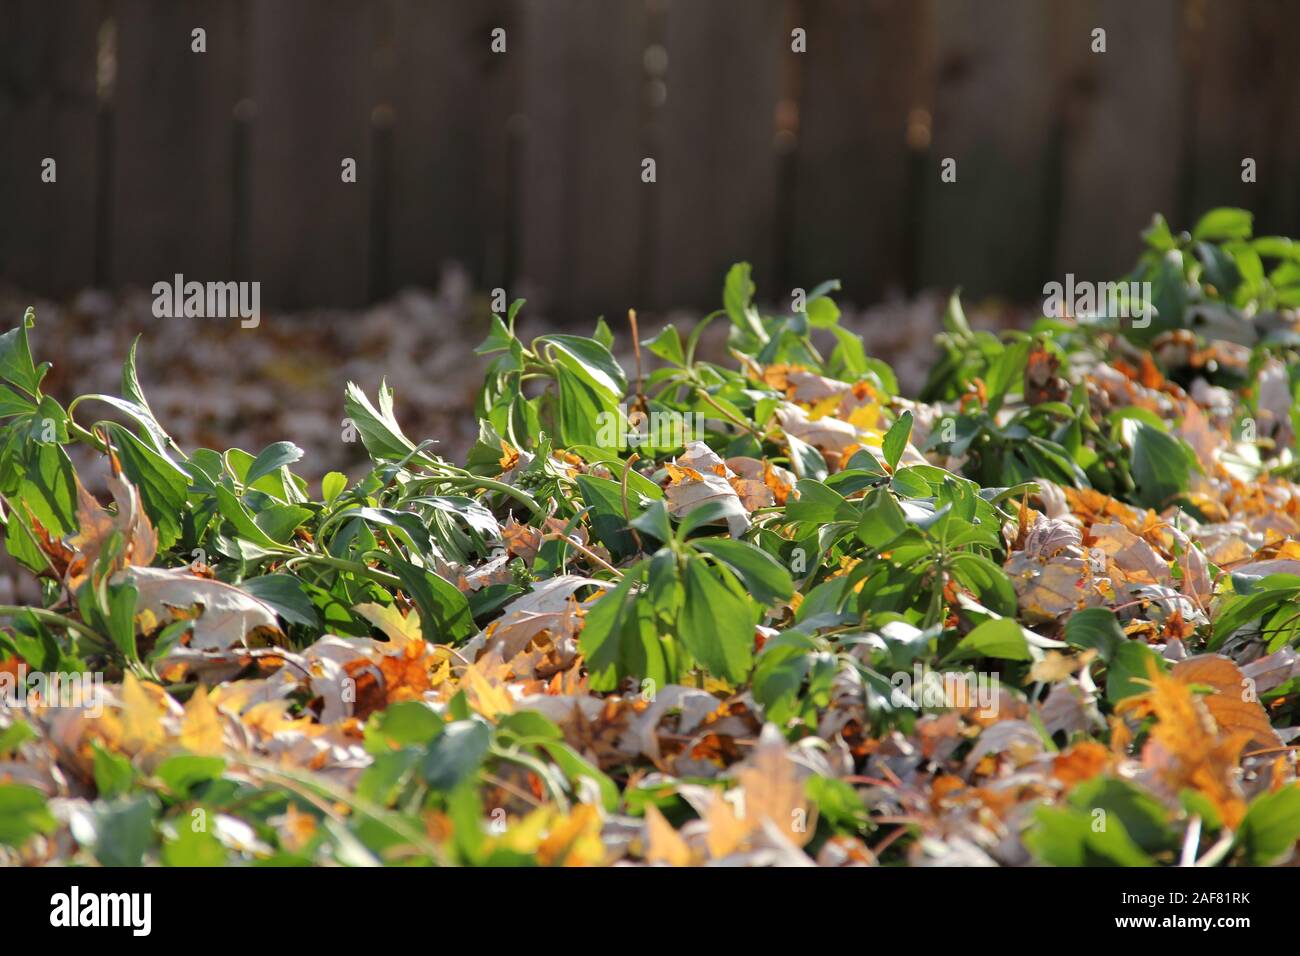 Autumn leaves laying on the ground, covering plants Stock Photo